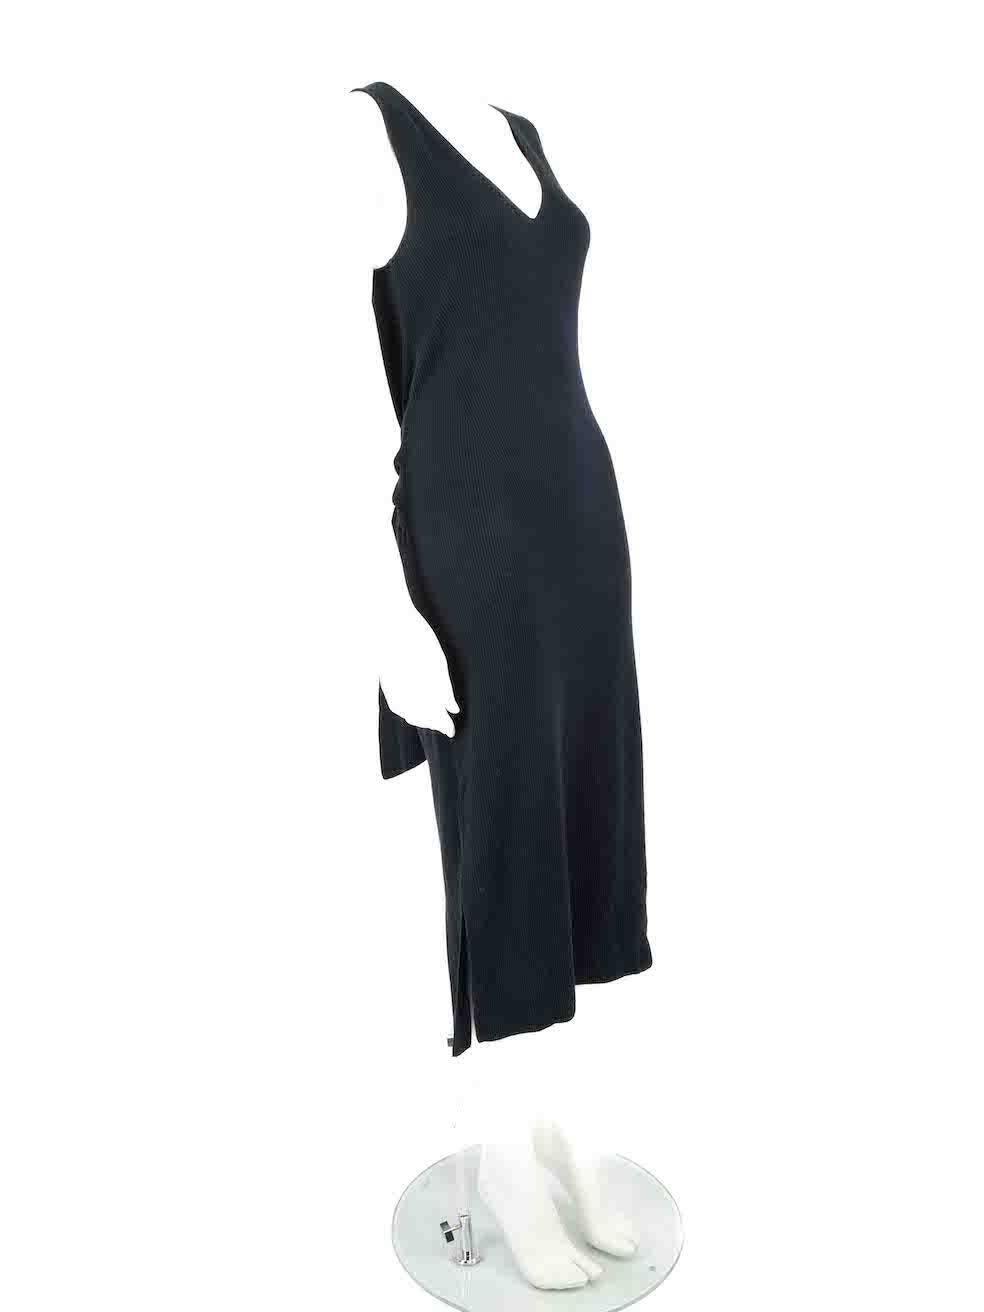 CONDITION is Good. Minor wear to dress is evident. Light wear to the knit composition with a handful of small plucks to the weave seen through the front and back and at the top of the hem side-seam splits on this used Rag & Bone designer resale